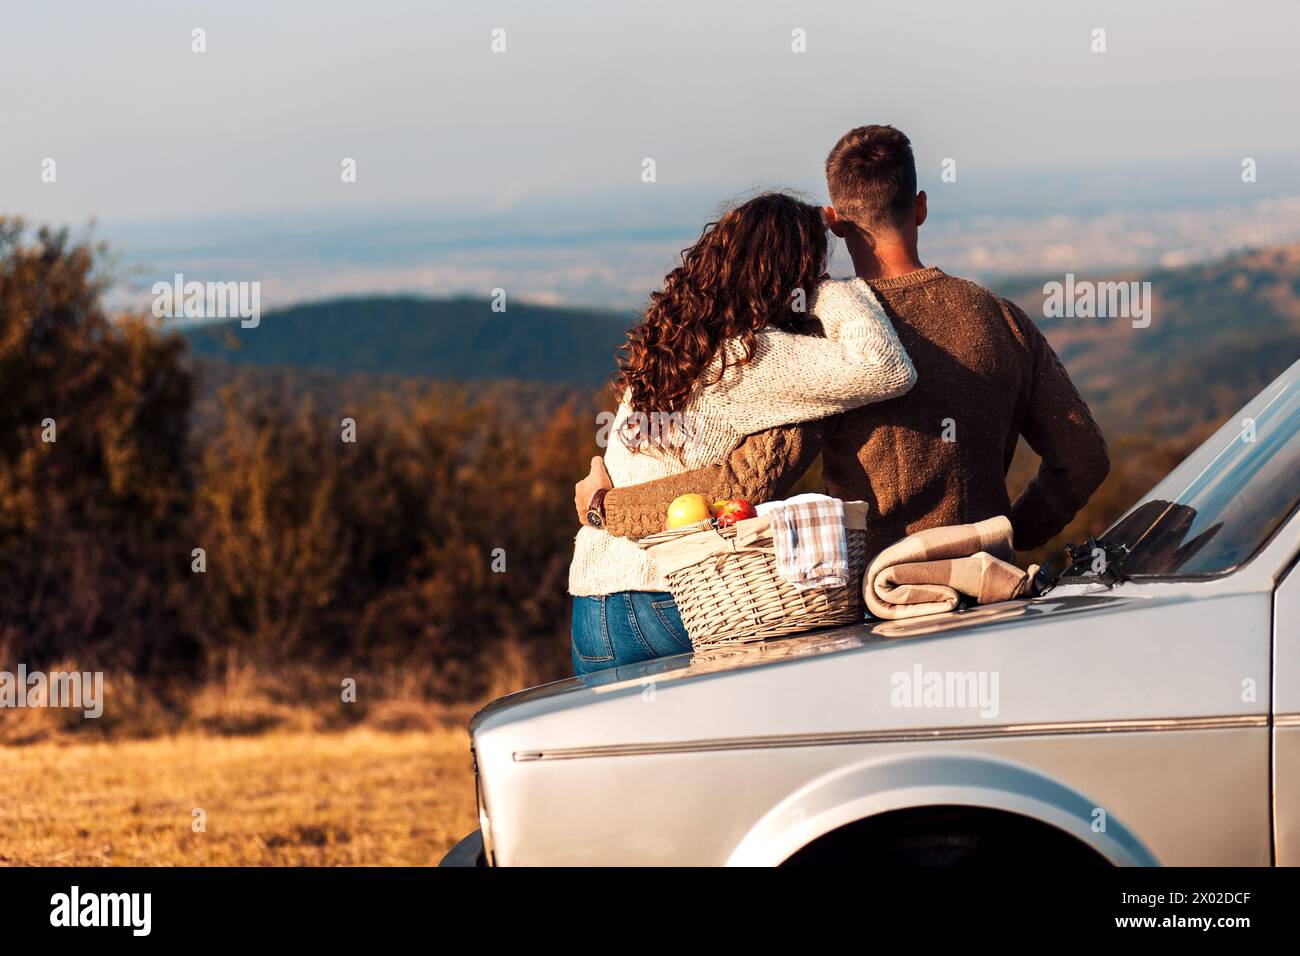 Rear view of couple enjoying picnic time on the sunset. They are sitting on old fashioned car and looking at distance. Stock Photo